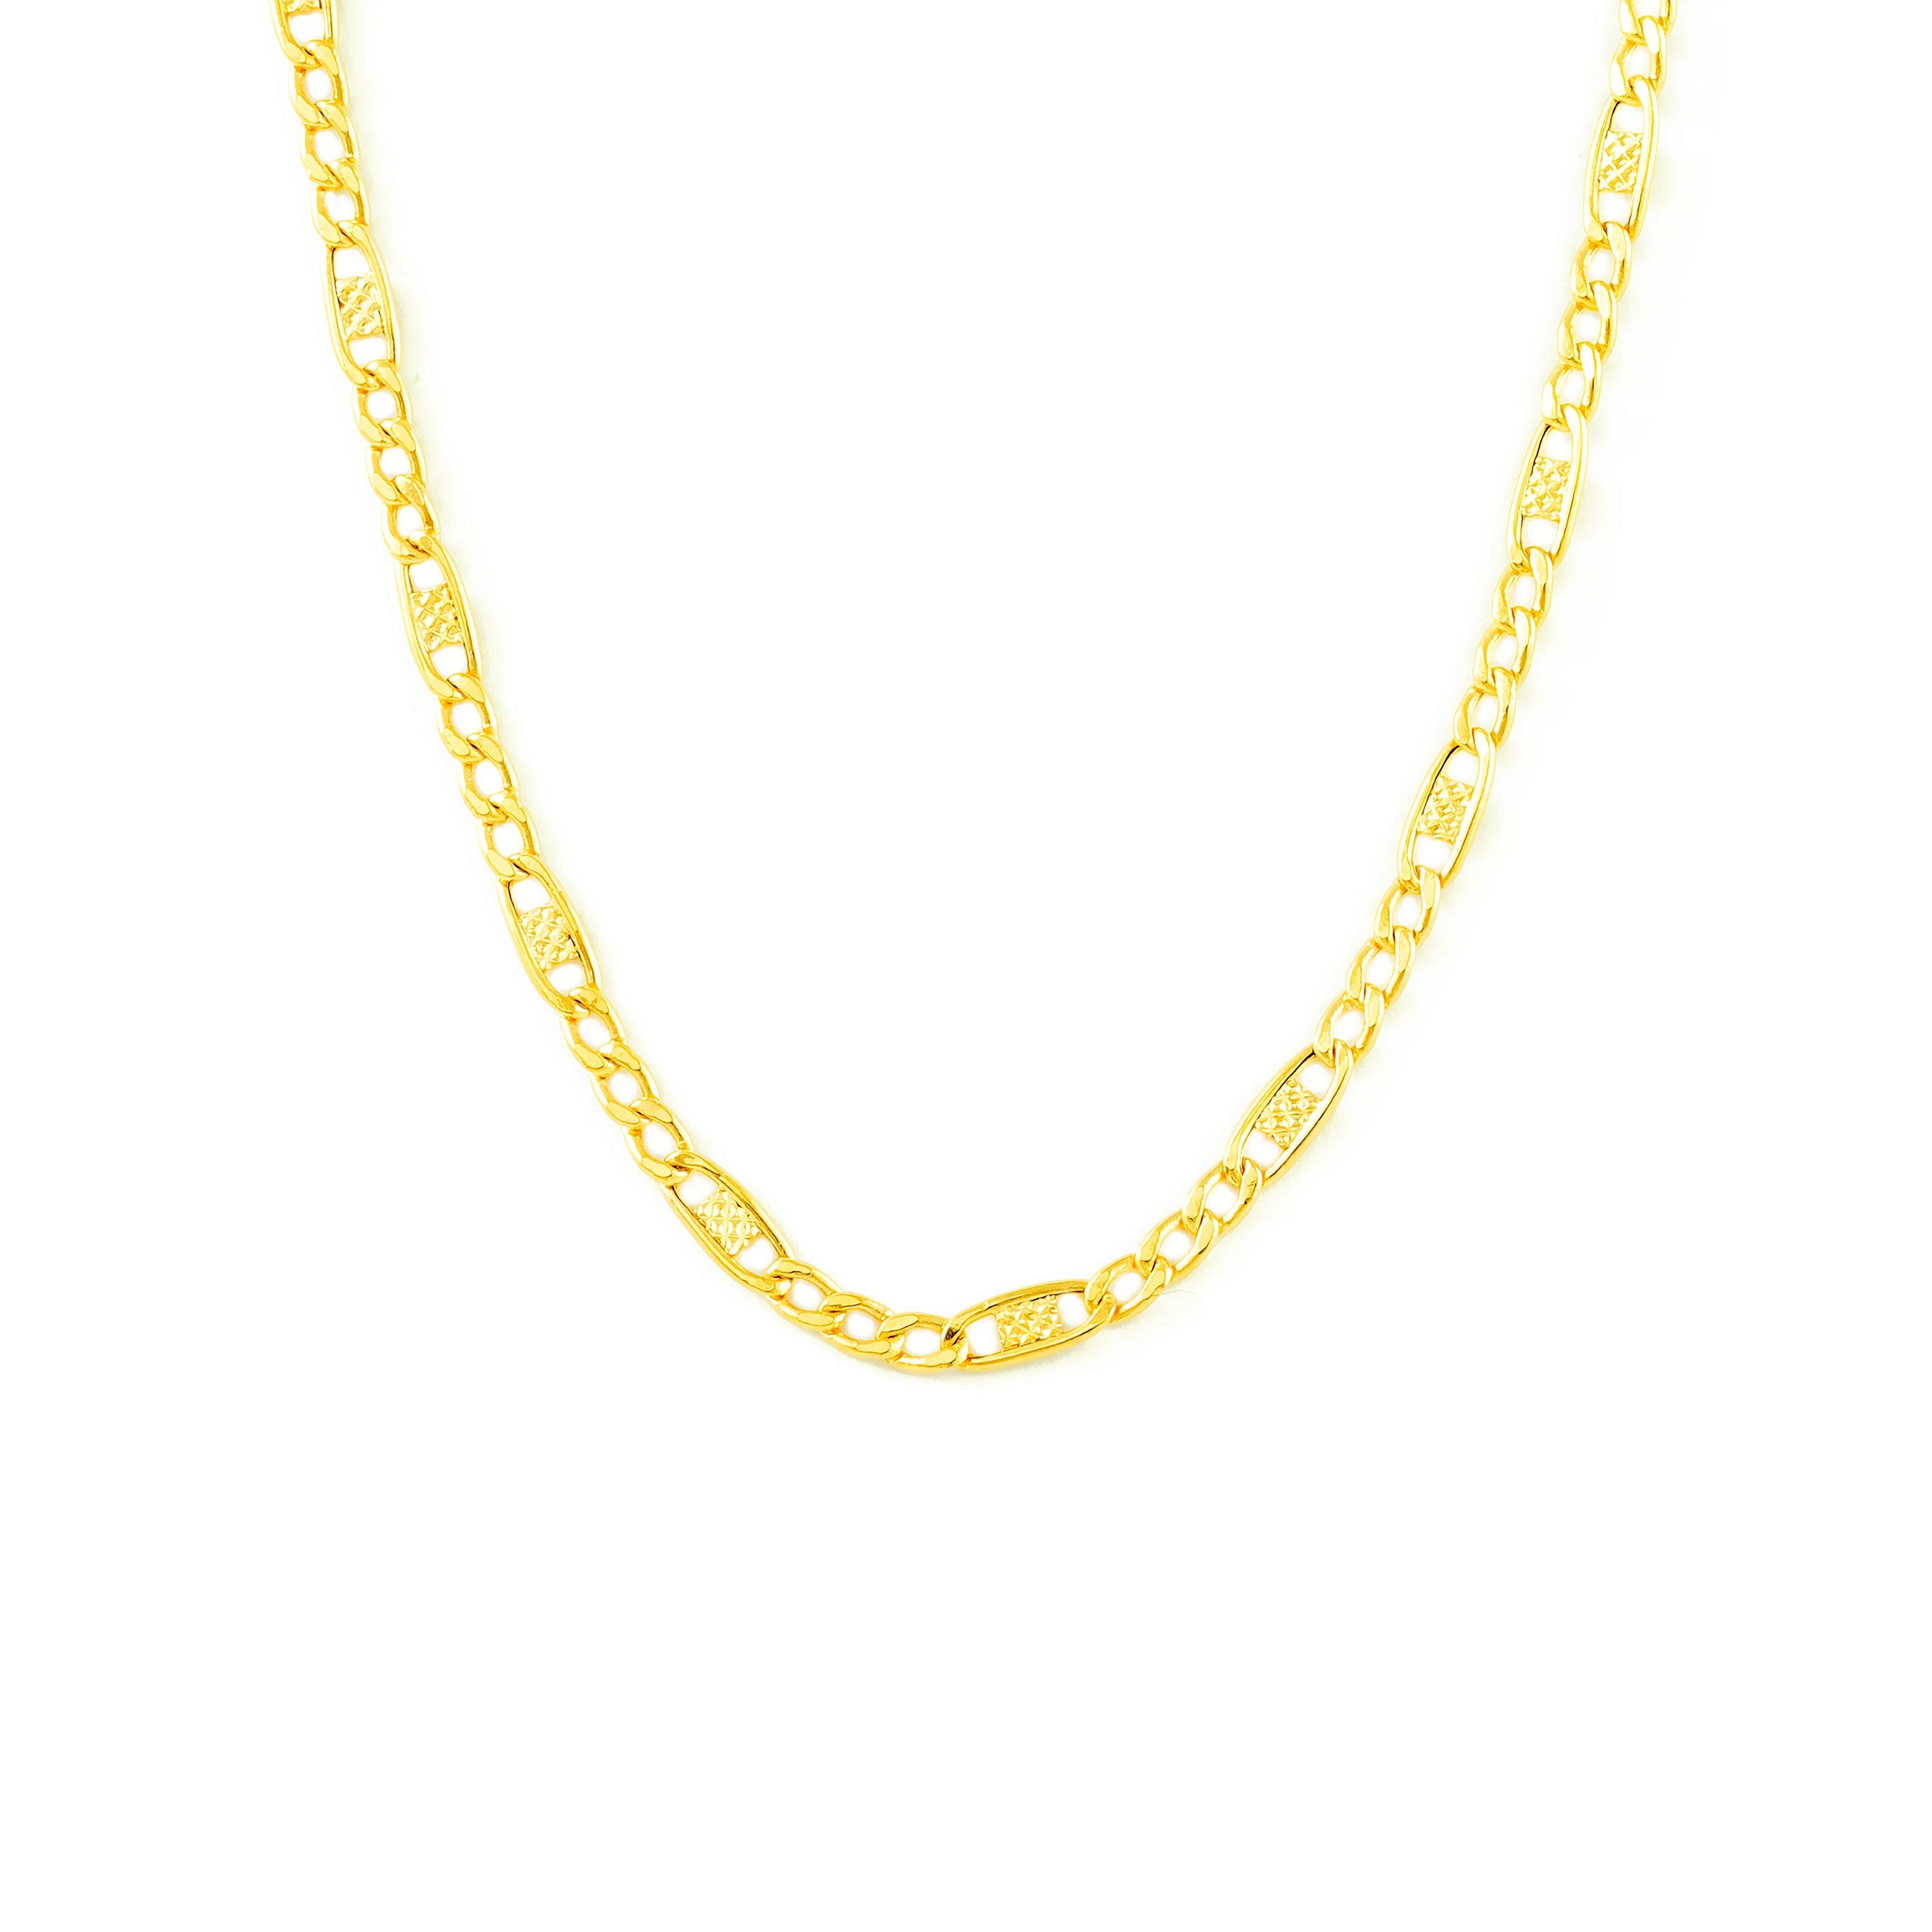 18K Yellow Gold Chain 3x1 textured link